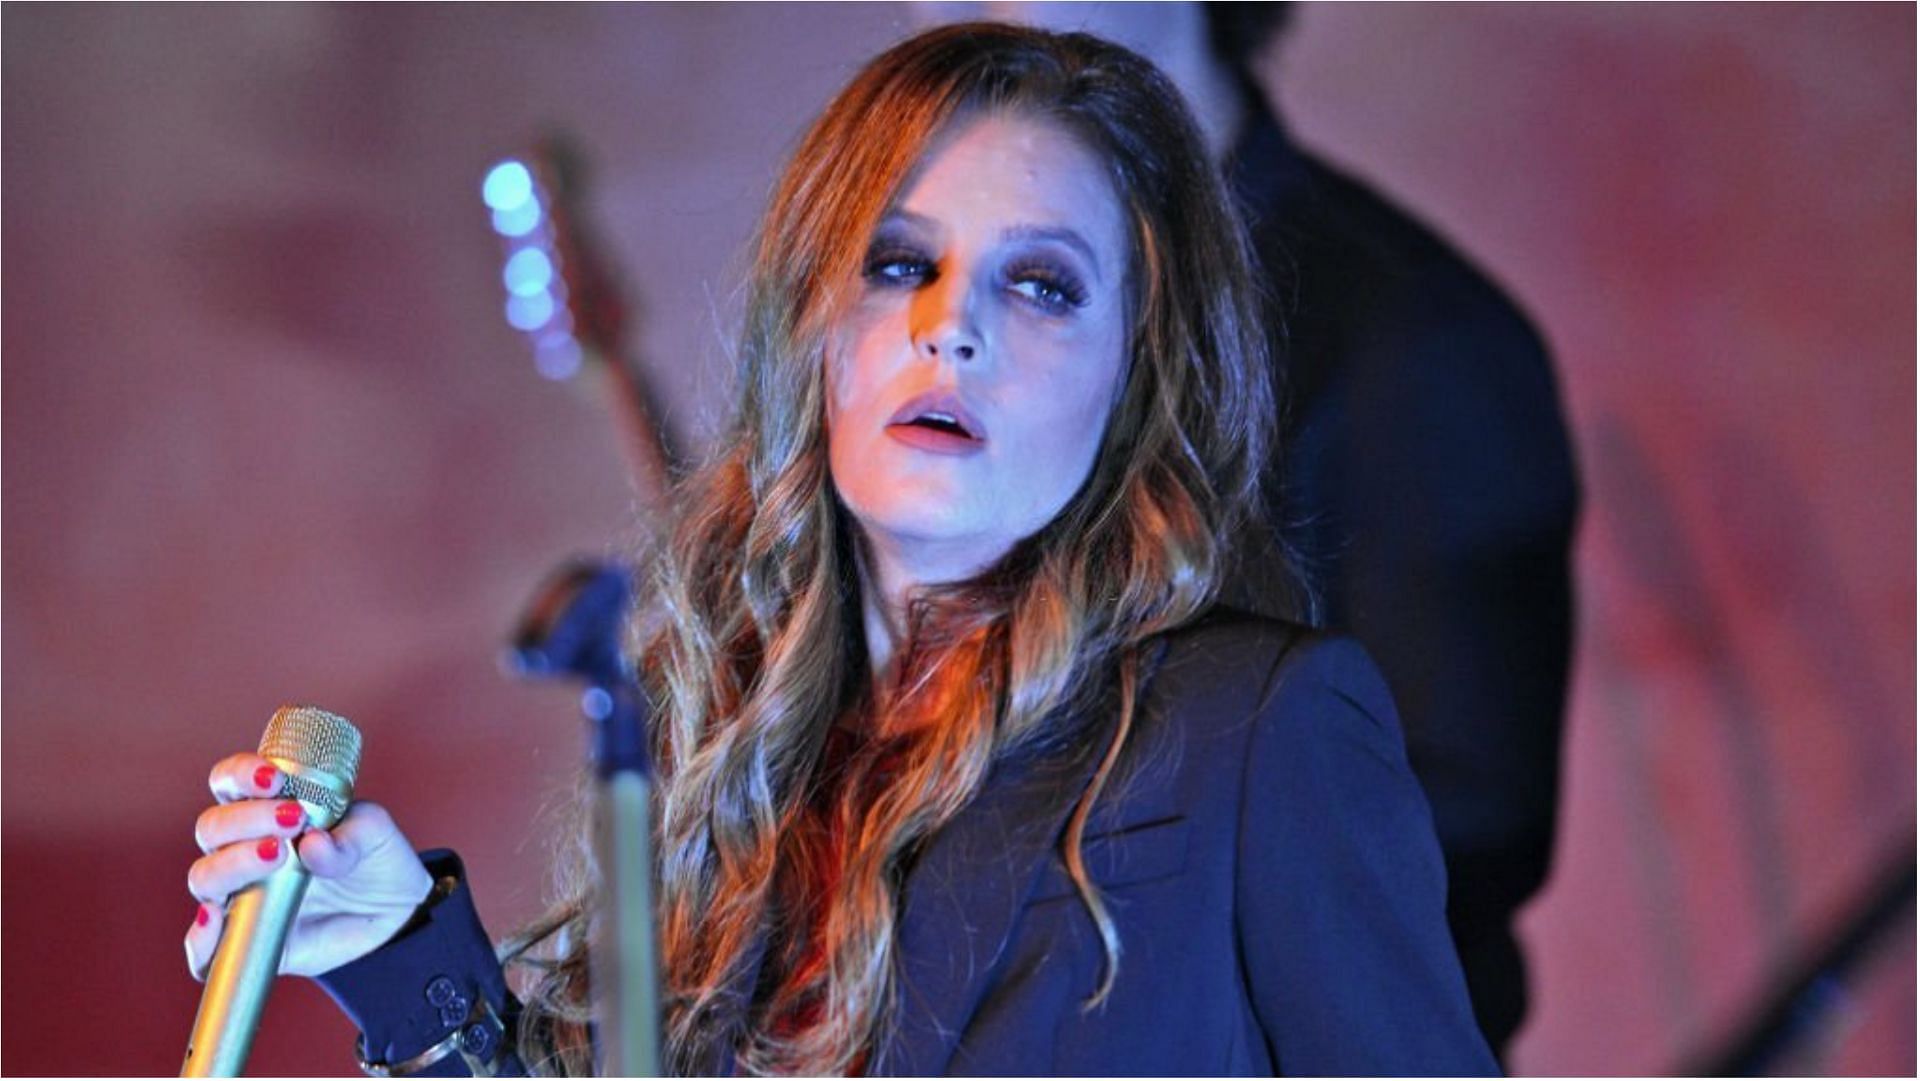 Lisa Marie Presley recently passed away at the age of 54 (Image via Arthur Pollock/Getty Images)